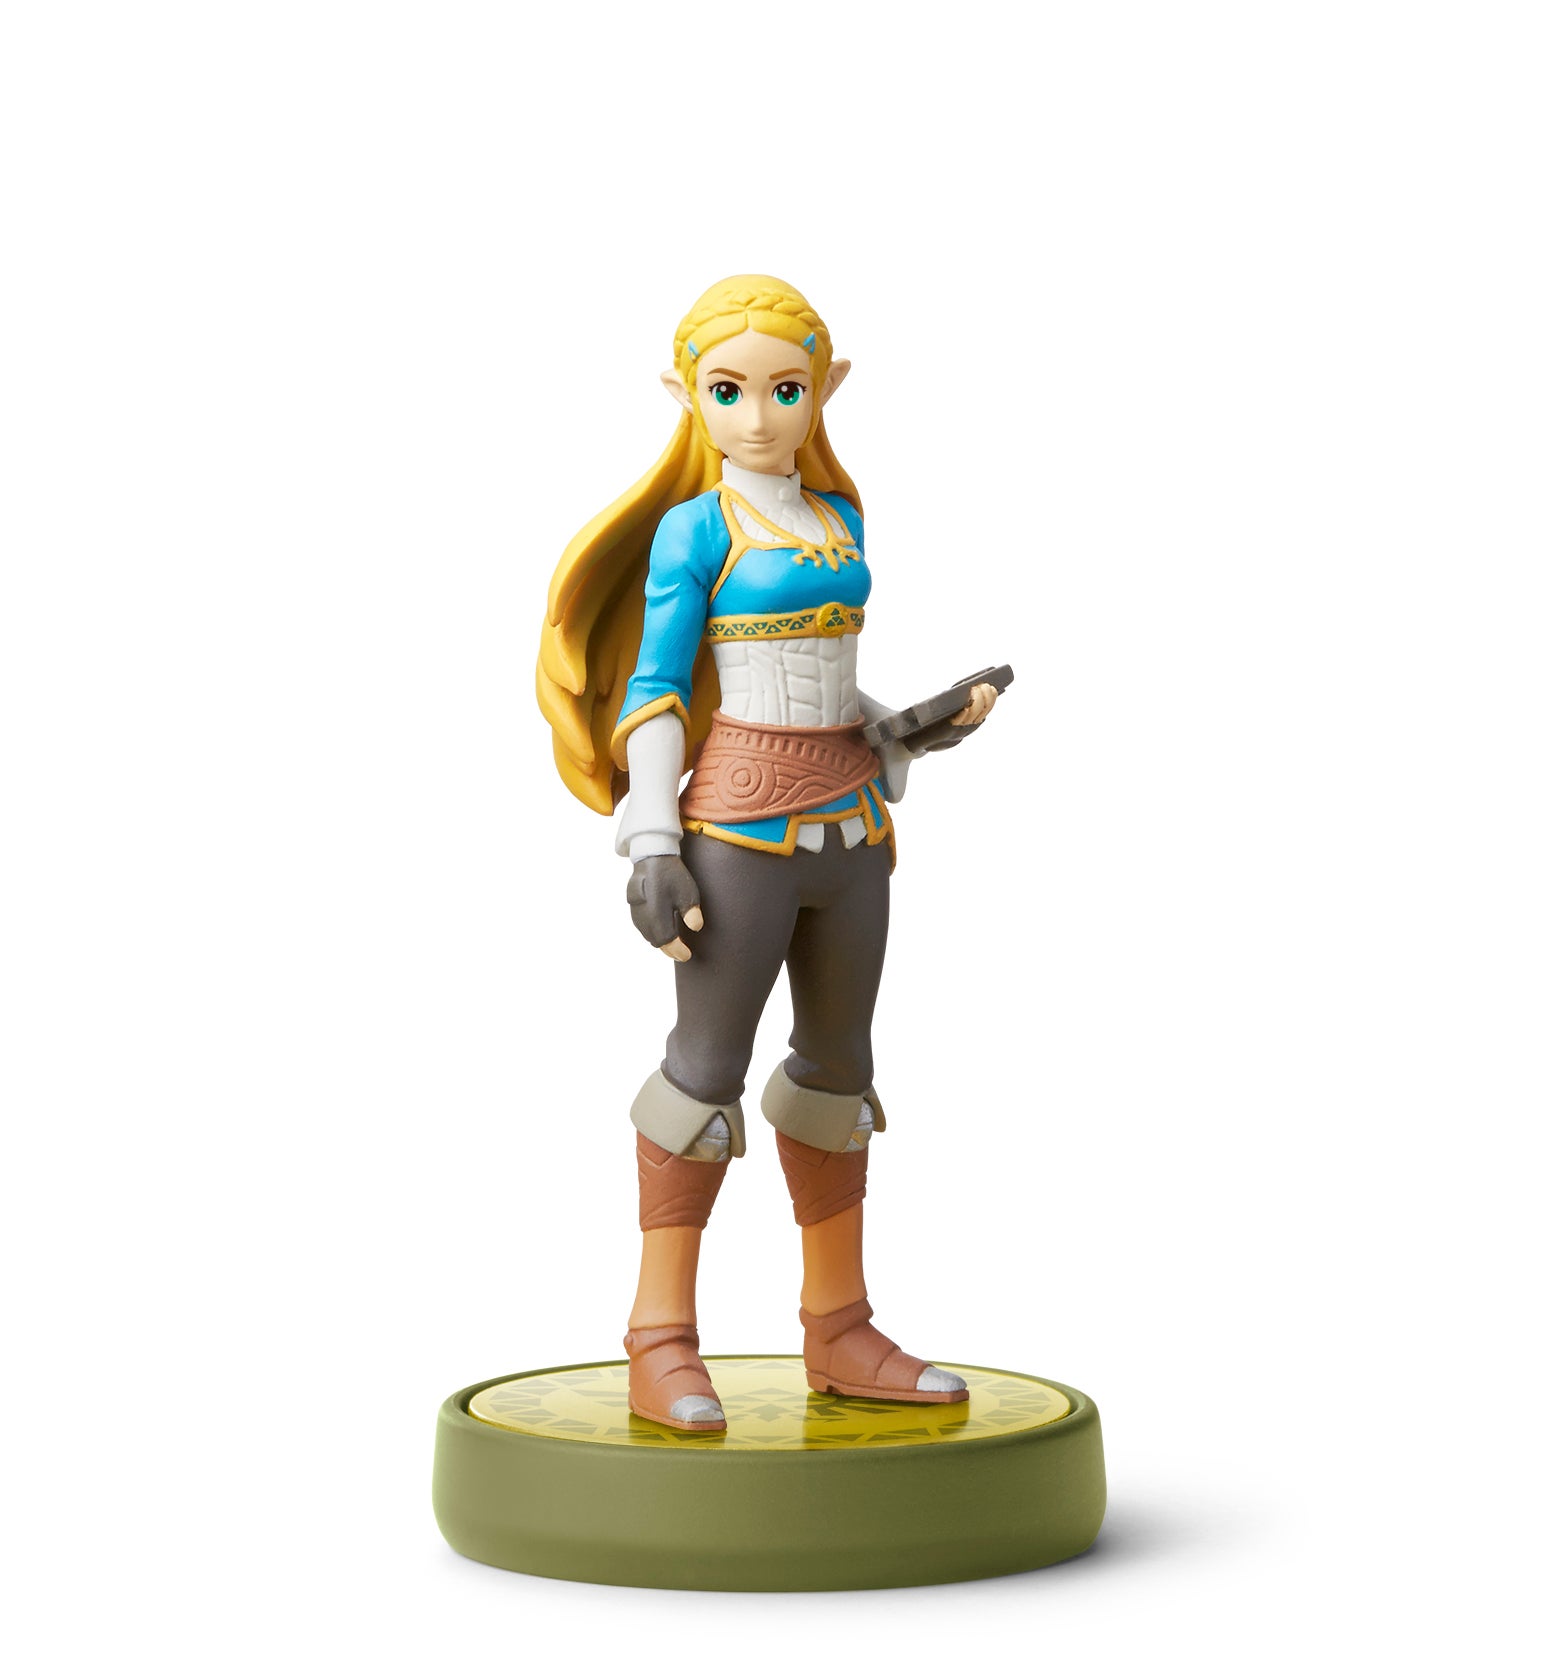 Zelda: Breath of the Wild amiibo guide: how to use amiibo what each does | VG247